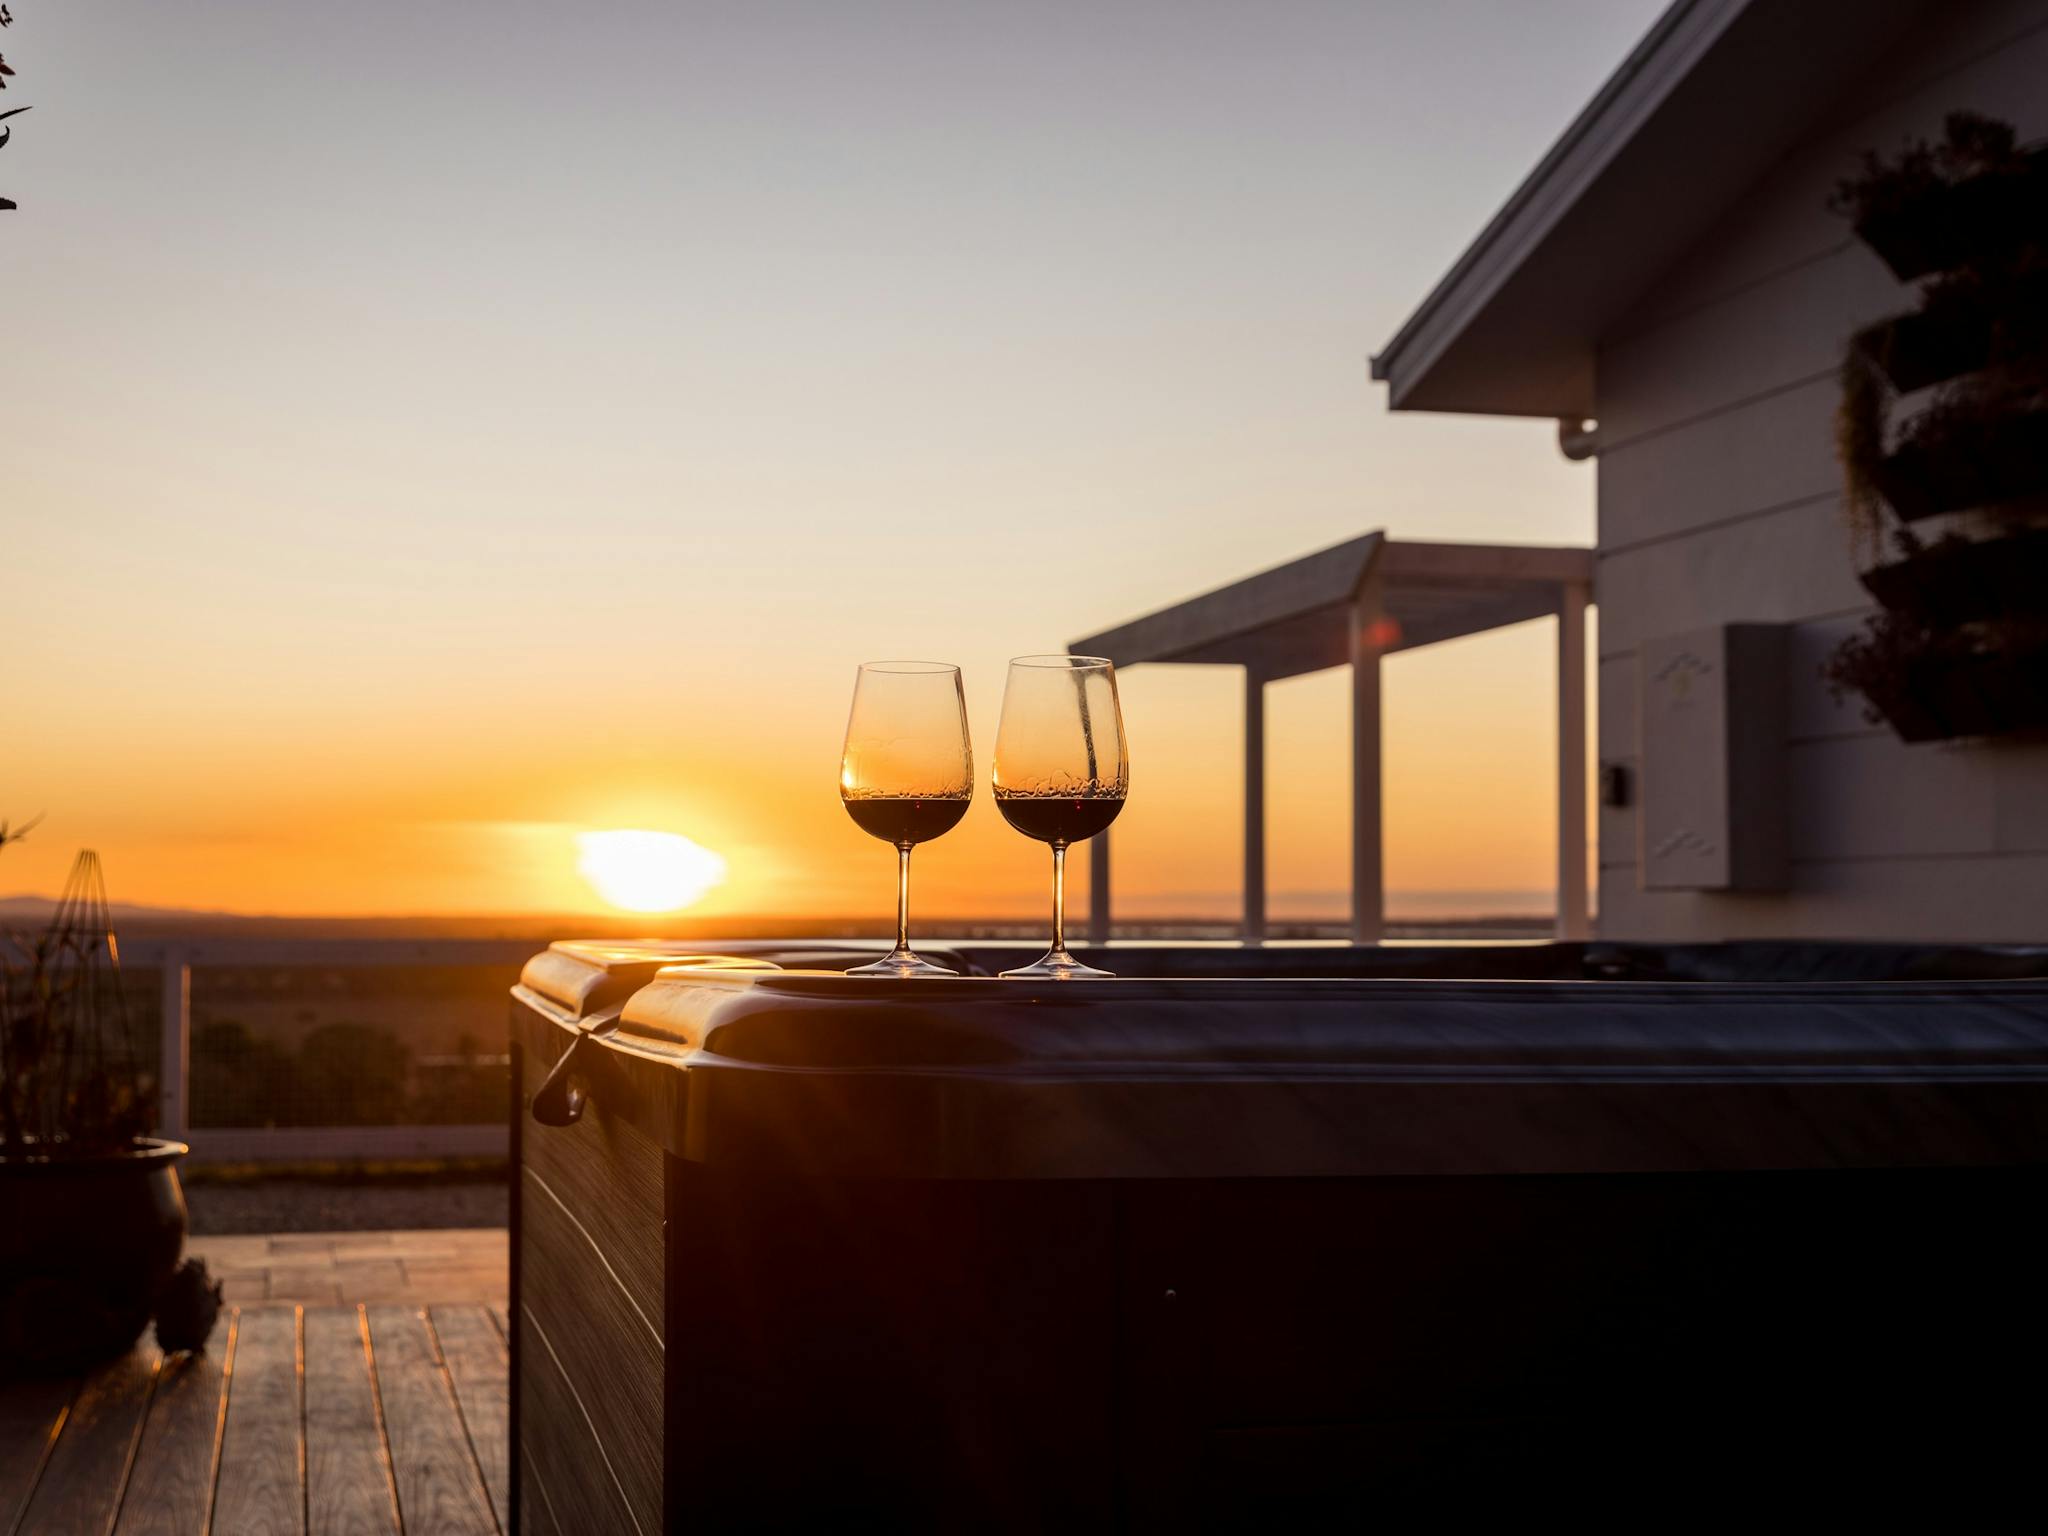 Outdoors, hot tub, horizon view, sunset; two wine glasses on hot tub